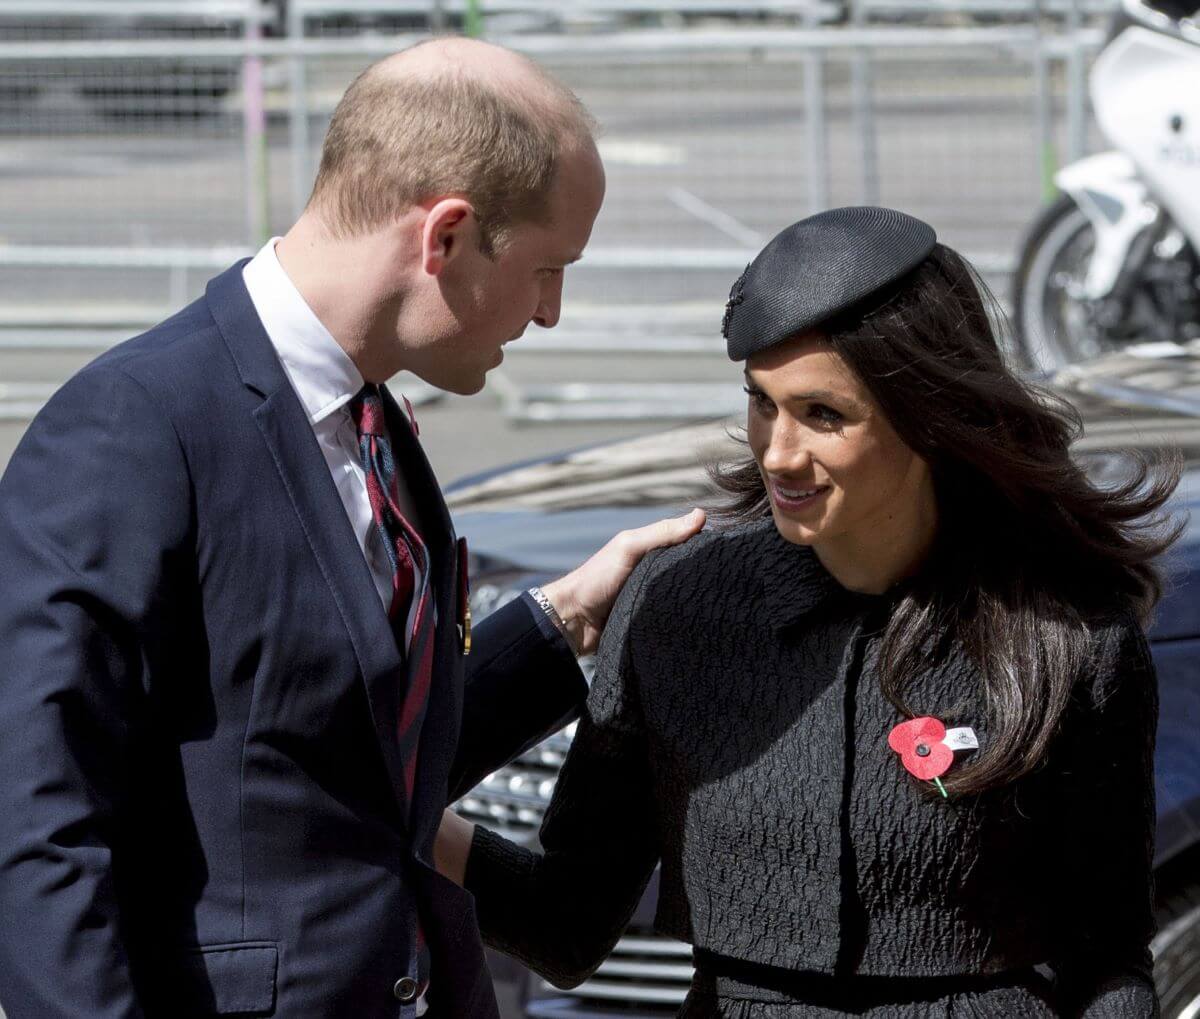 Prince William greets Meghan Markle as they attend an Anzac Day service at Westminster Abbey